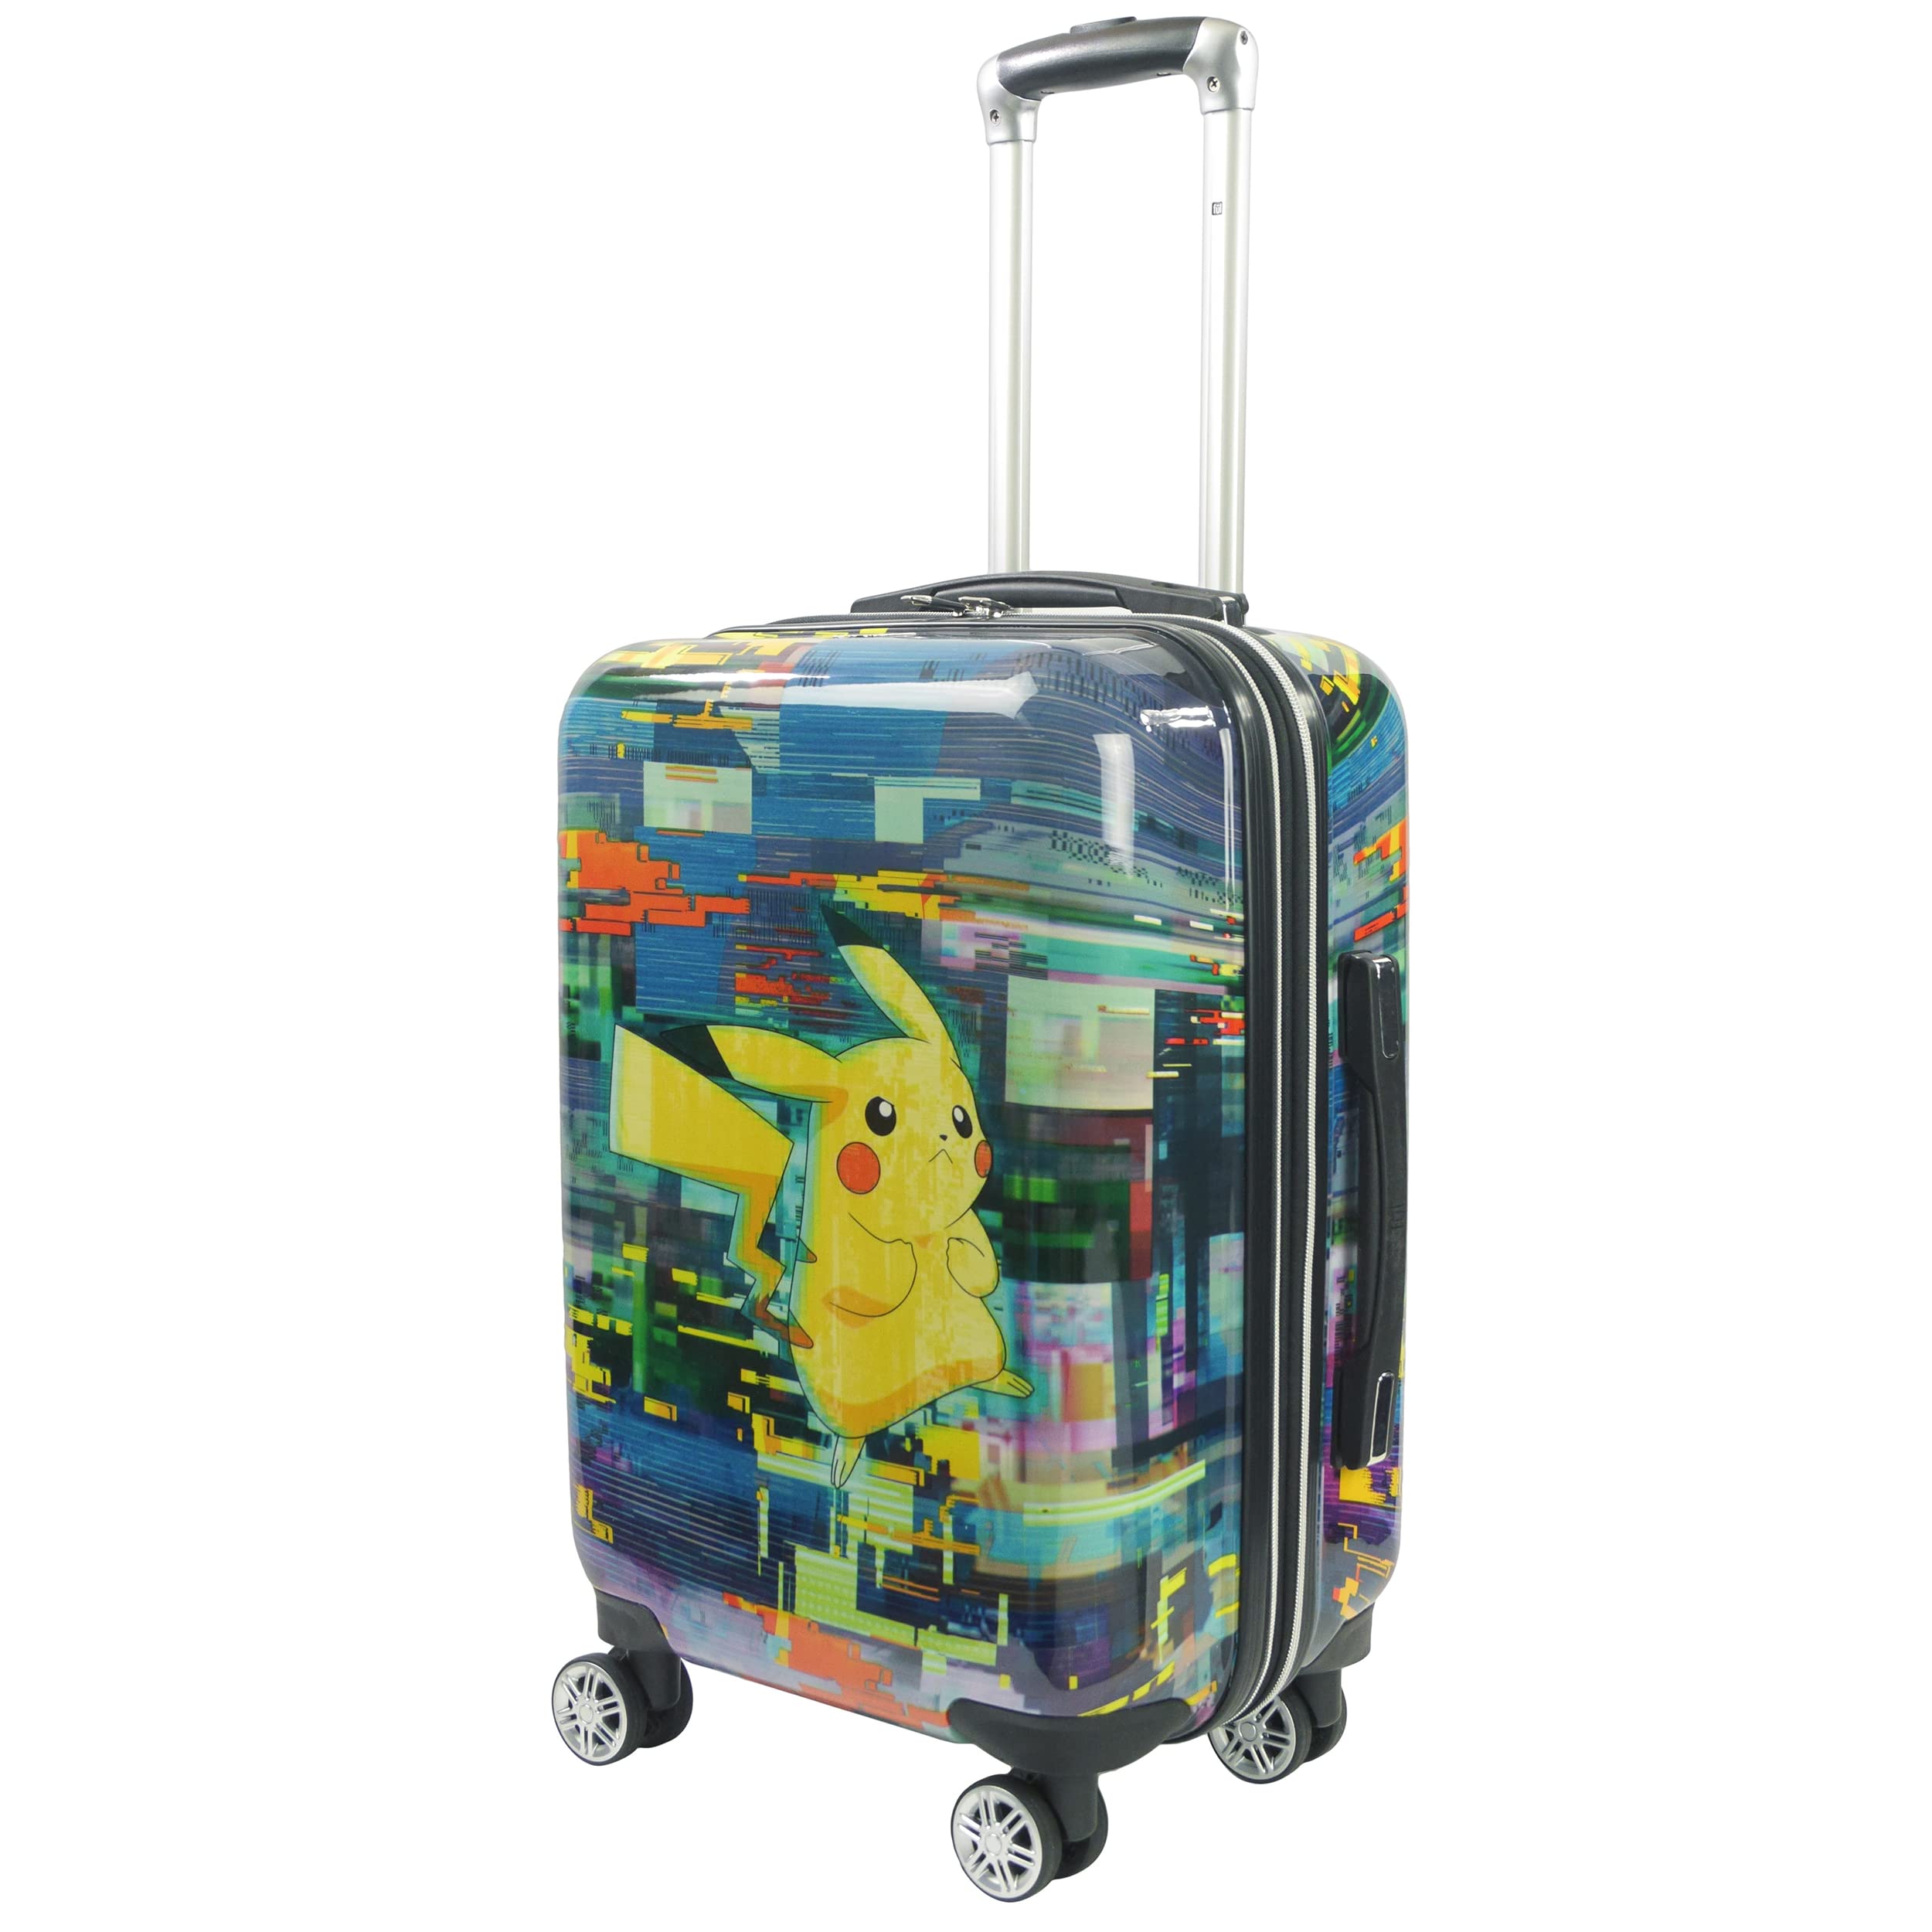 Ful Pokemon Pikachu 21 Inch Rolling Luggage, Hardshell carry On Suitcase with Wheels, Multicolor (FBML0001-998)